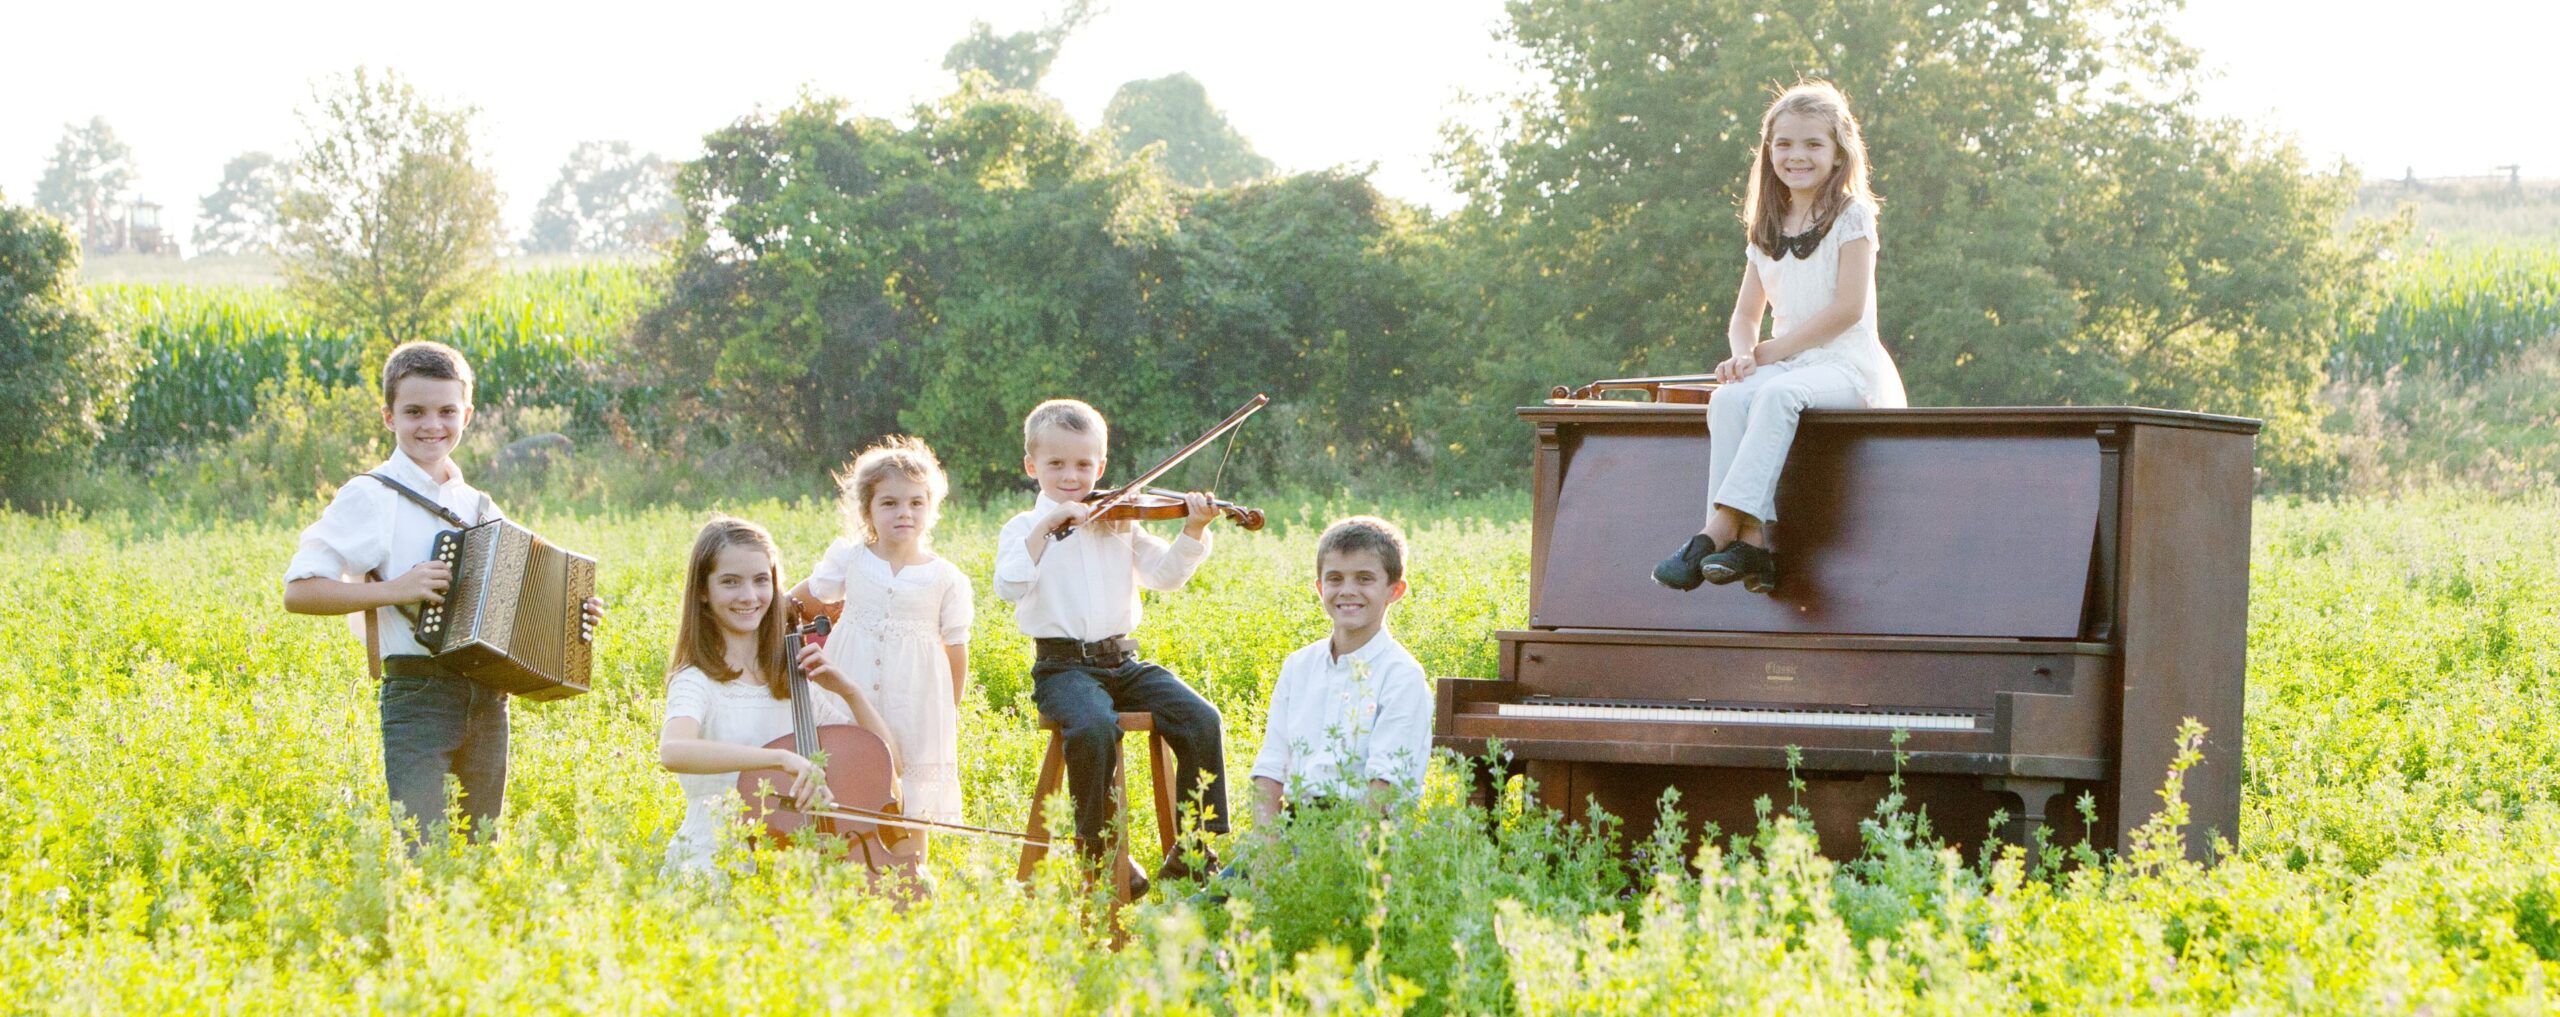 The Leahy children sitting on a piano in the middle of a field.